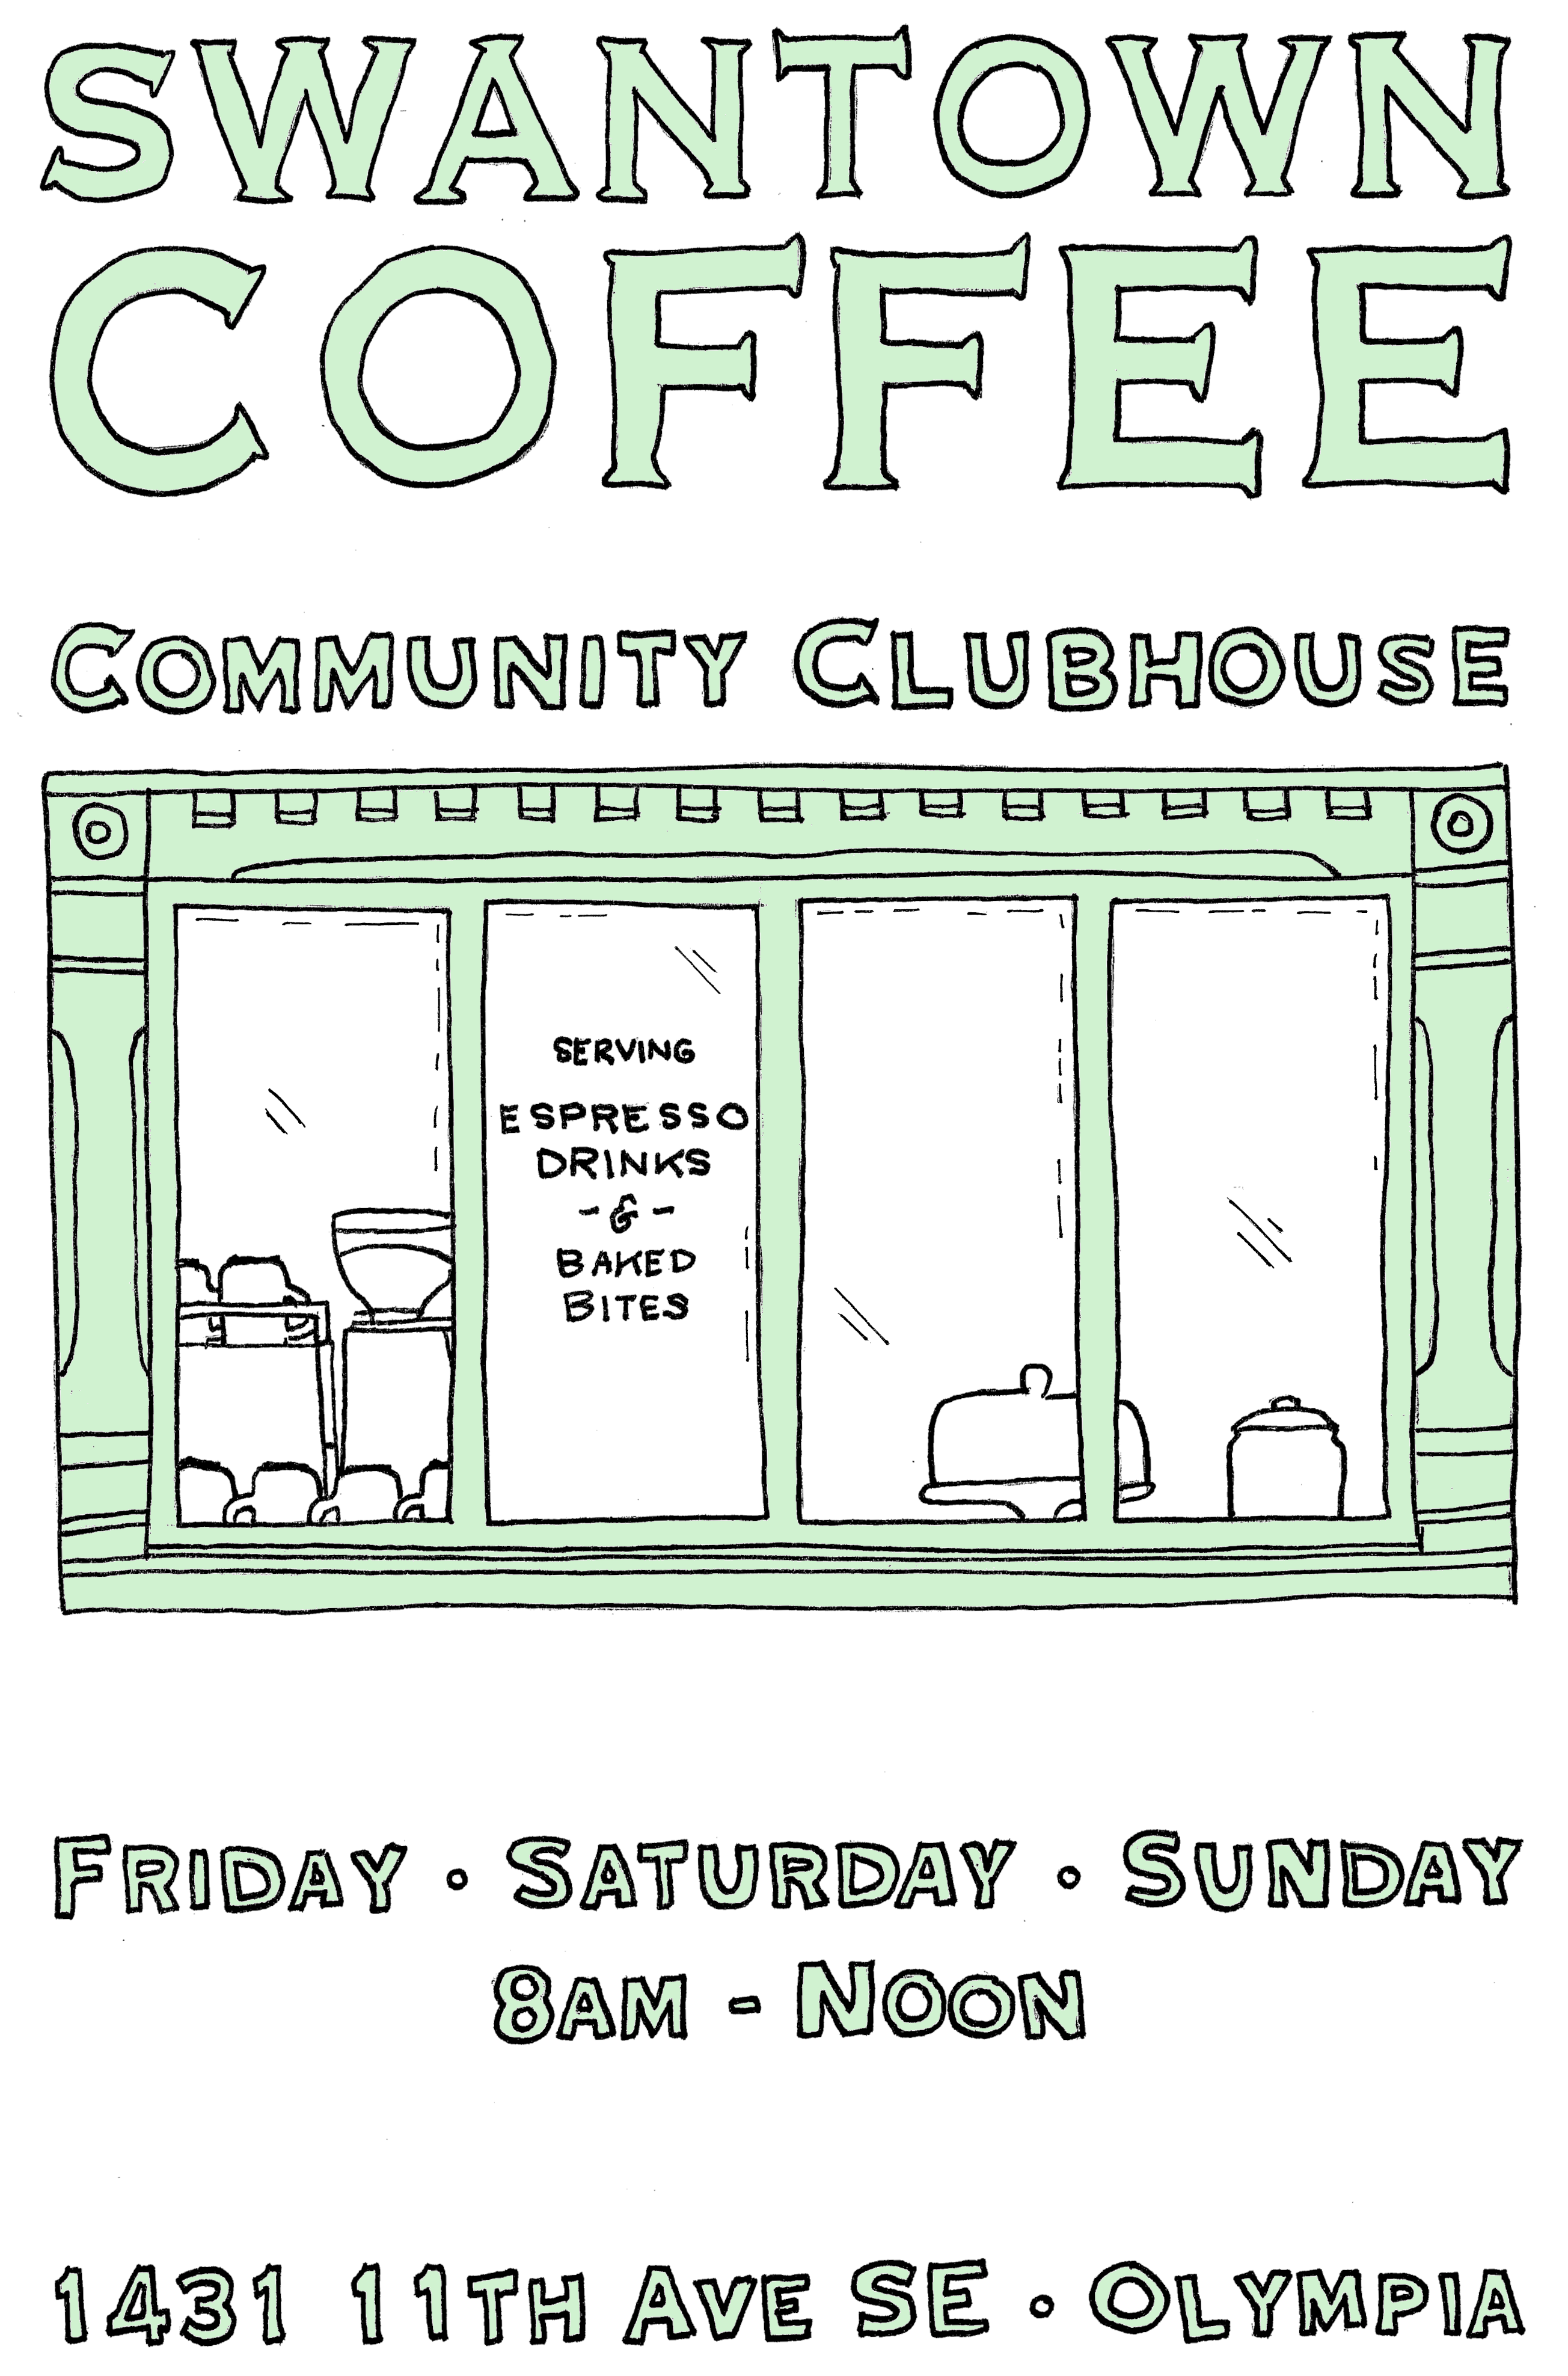 Swantown Coffee Community Clubhouse. Serving Espresso Drinks and Baked Bites. Open Friday Saturday Sunday 8:00 to noon. 1431 11th Ave SE, Olympia WA 98501